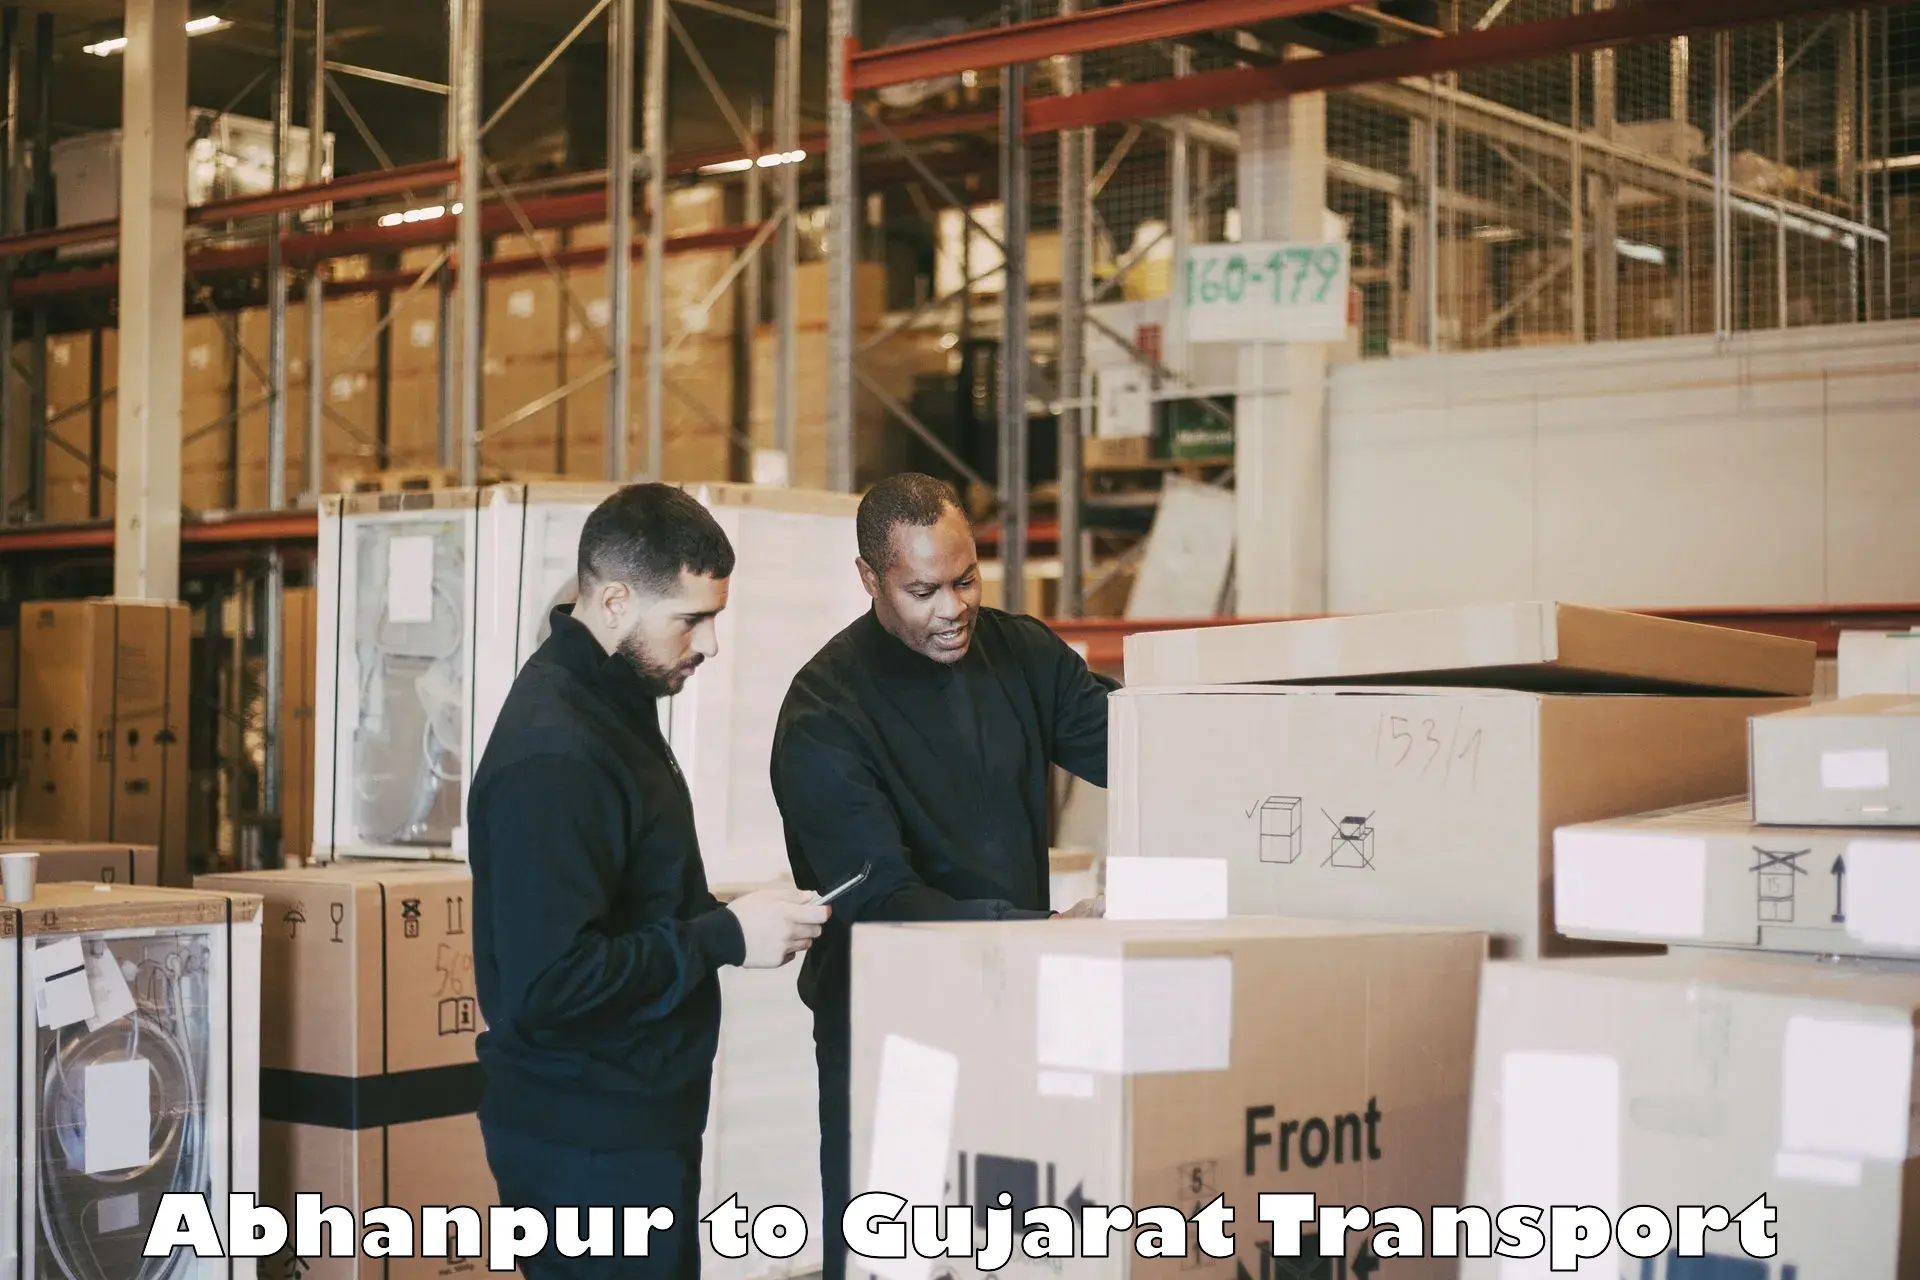 Commercial transport service in Abhanpur to Vadodara